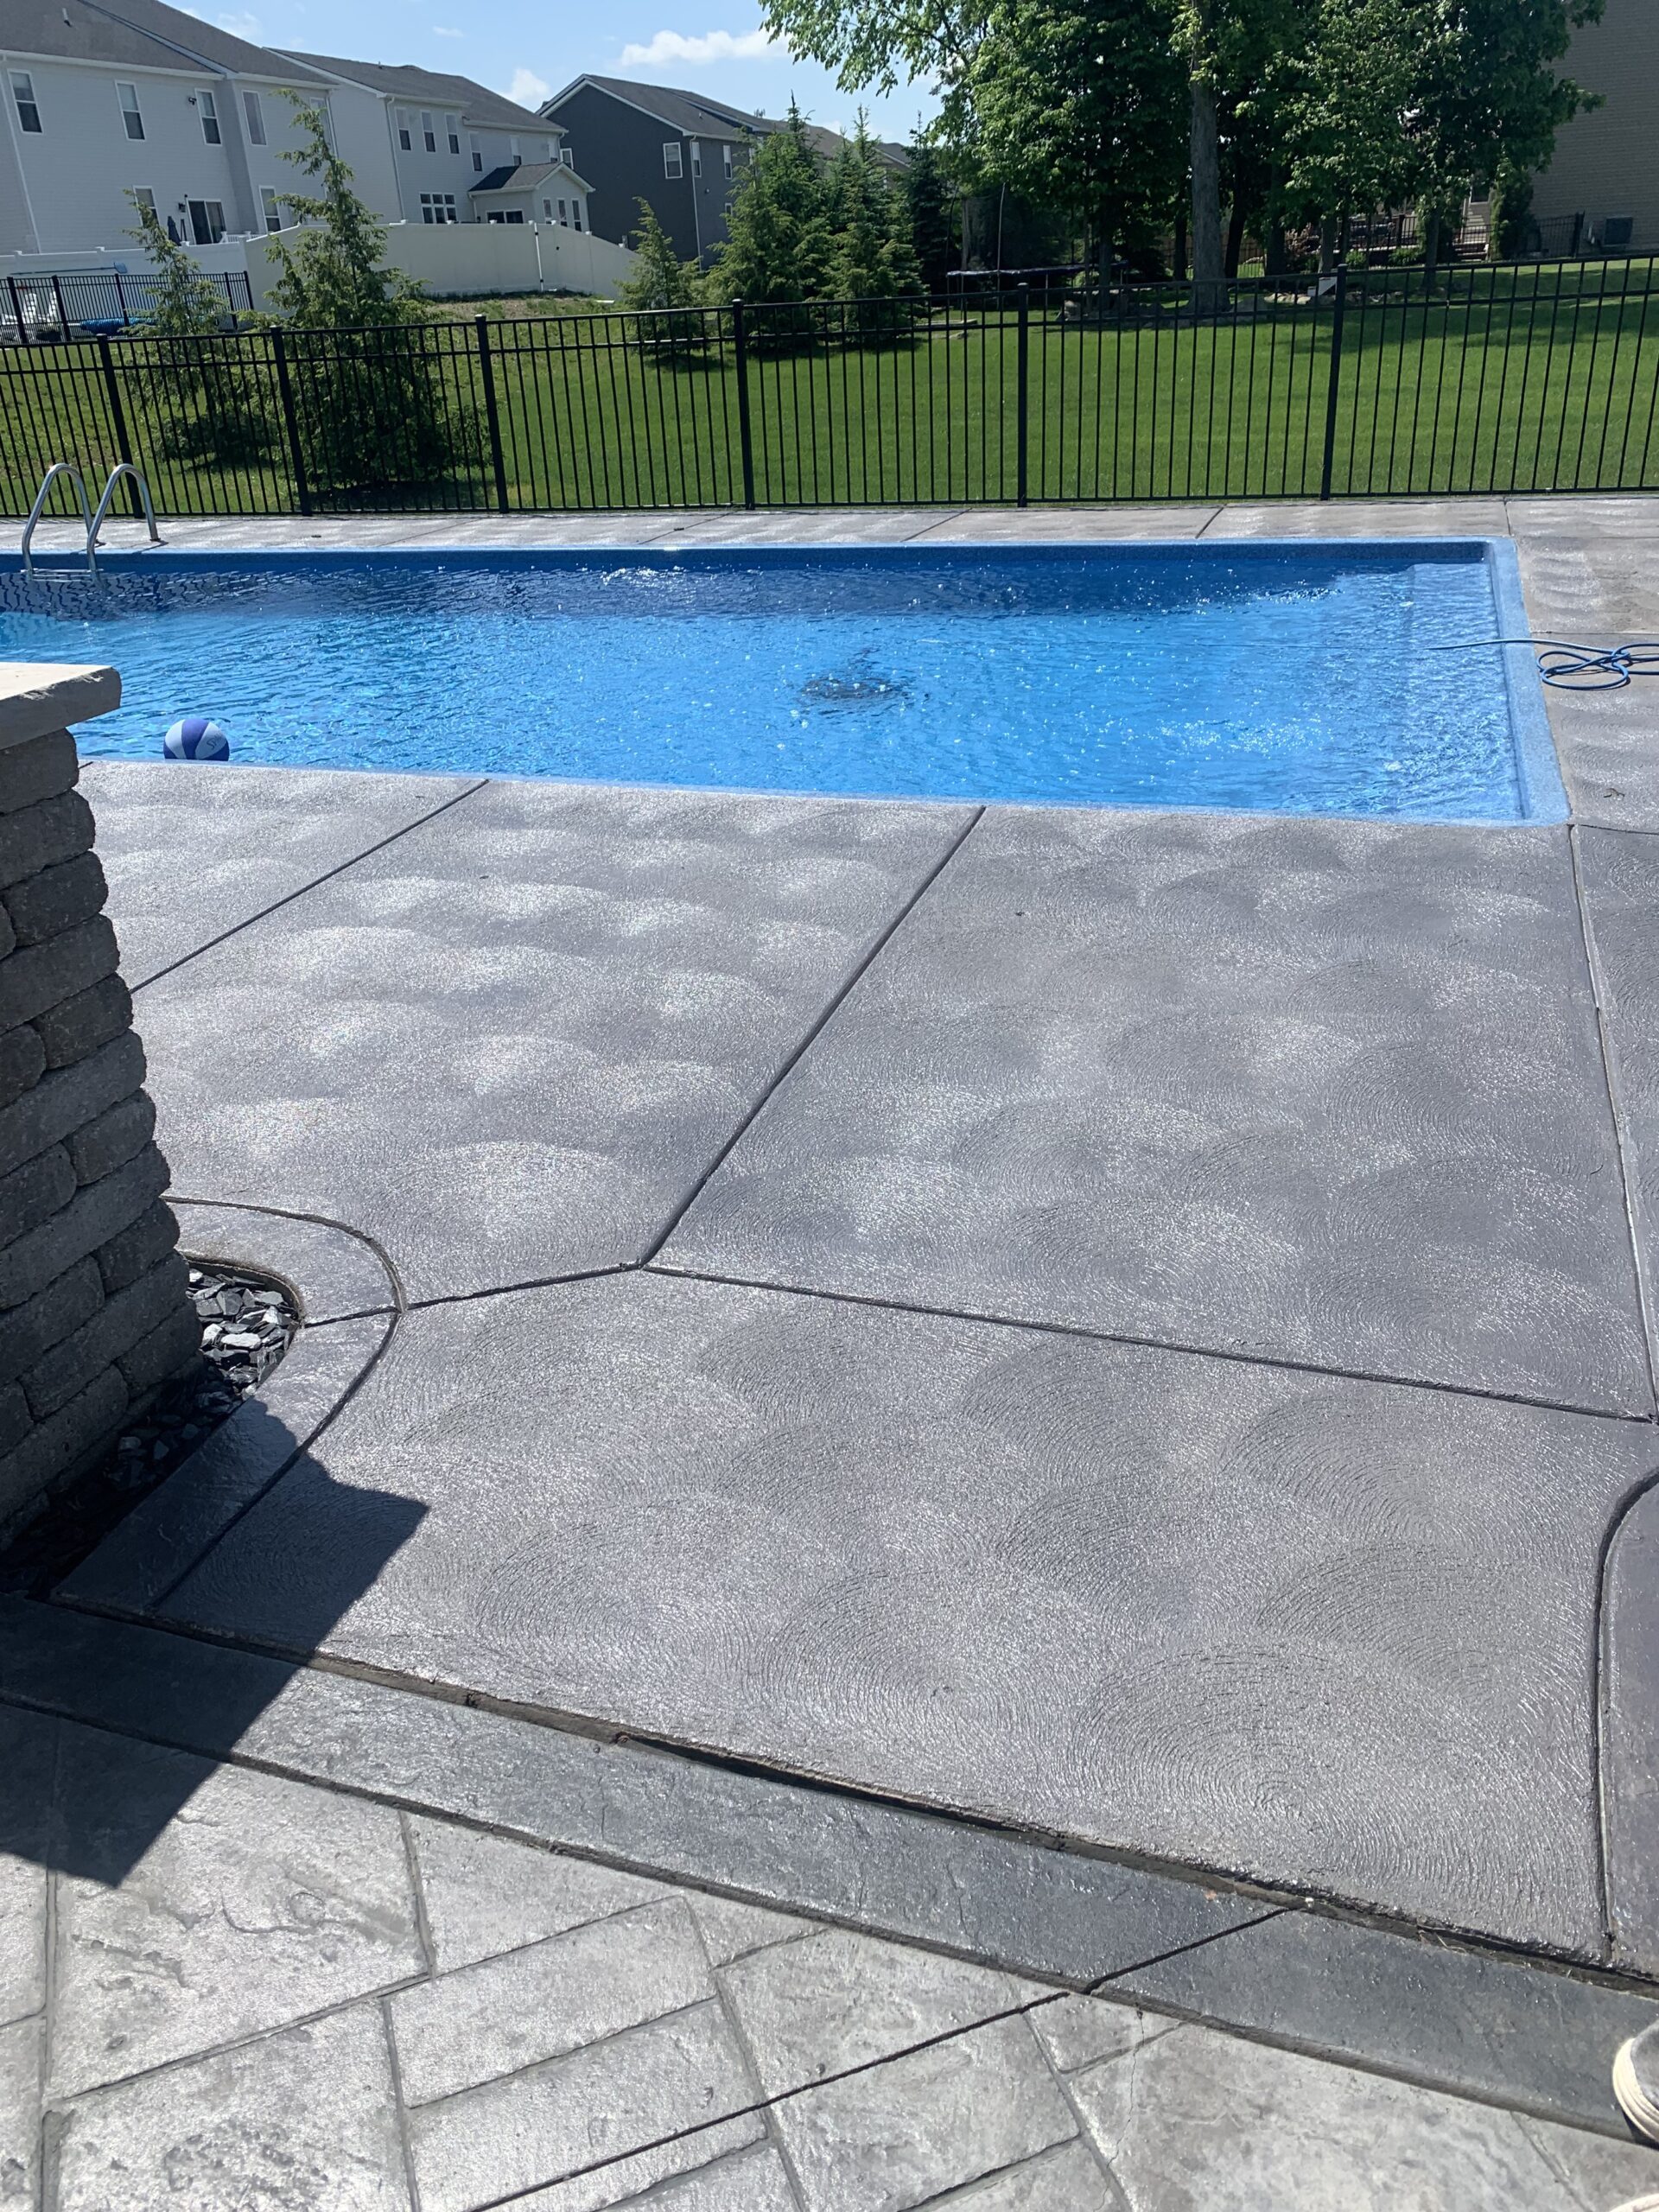 Enhance your pool's design with a gray EasyTint satin finish on a swirl-textured concrete pool deck, perfect for a stylish and long-lasting summer surface.